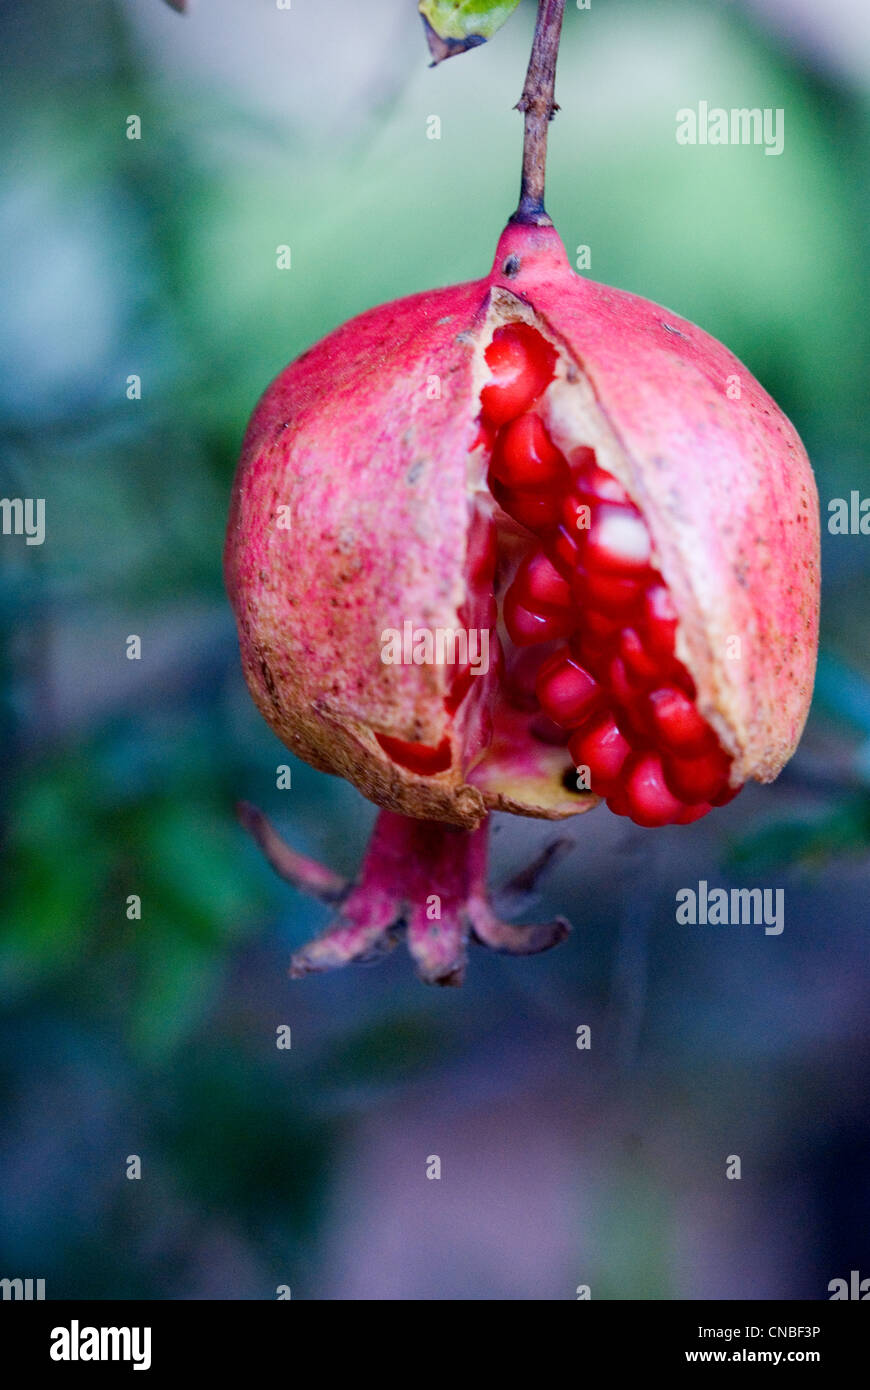 Macro view of a pomegranate fruit split showing the ripe seeds / pips. Stock Photo